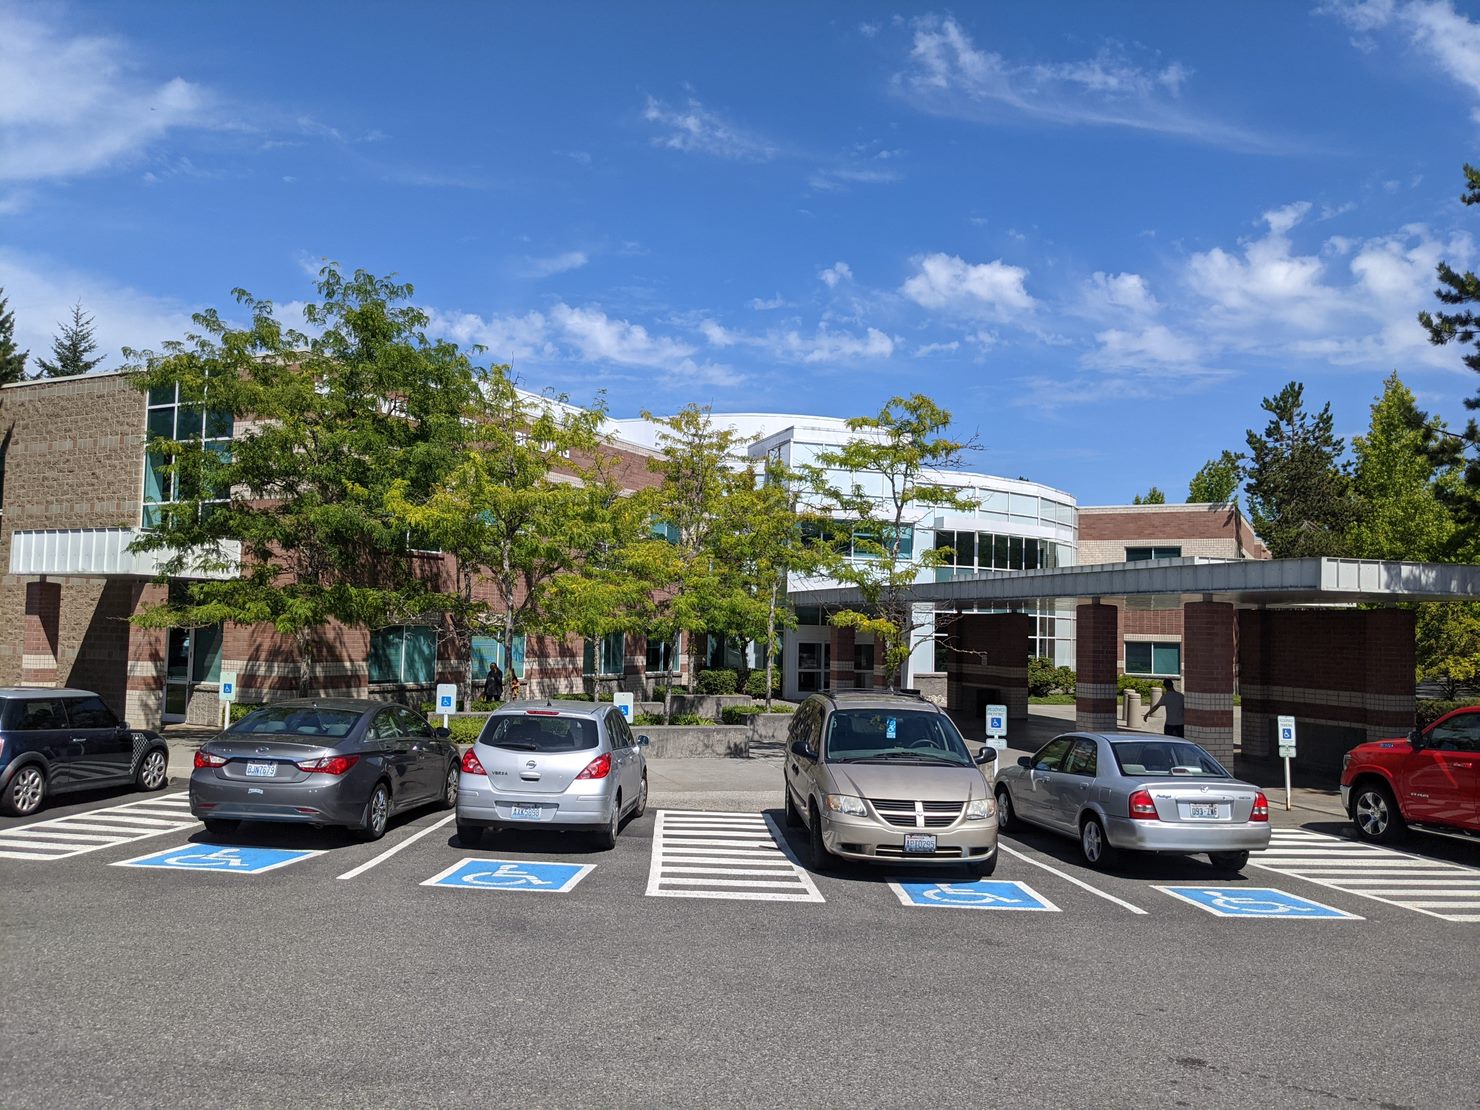 Parking, including handicap stalls, at Providence MIll Creek Walk-in Clinic.